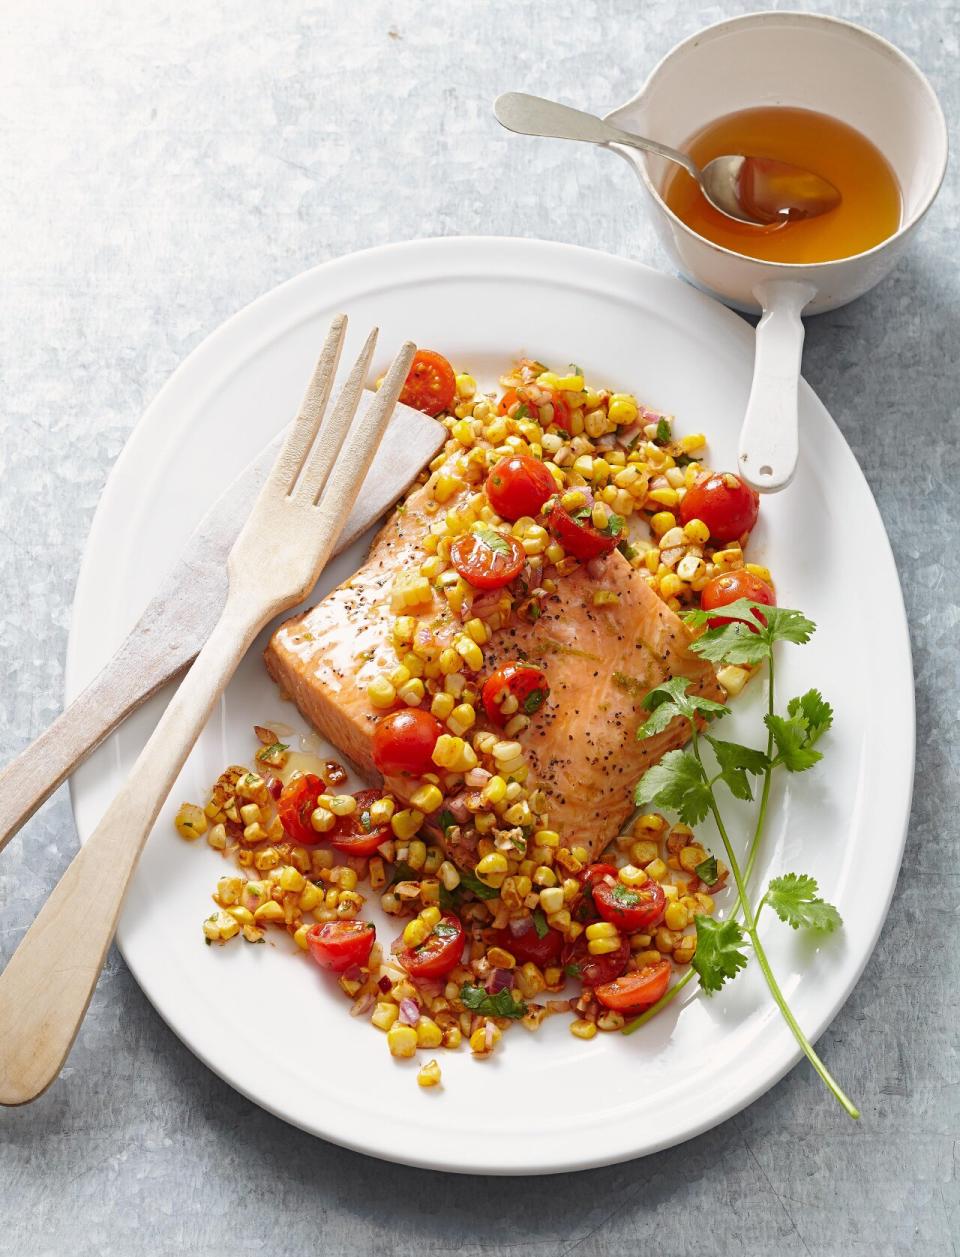 Bake the tomatoes and corn in this recipe alongside the salmon for convenience and ease.